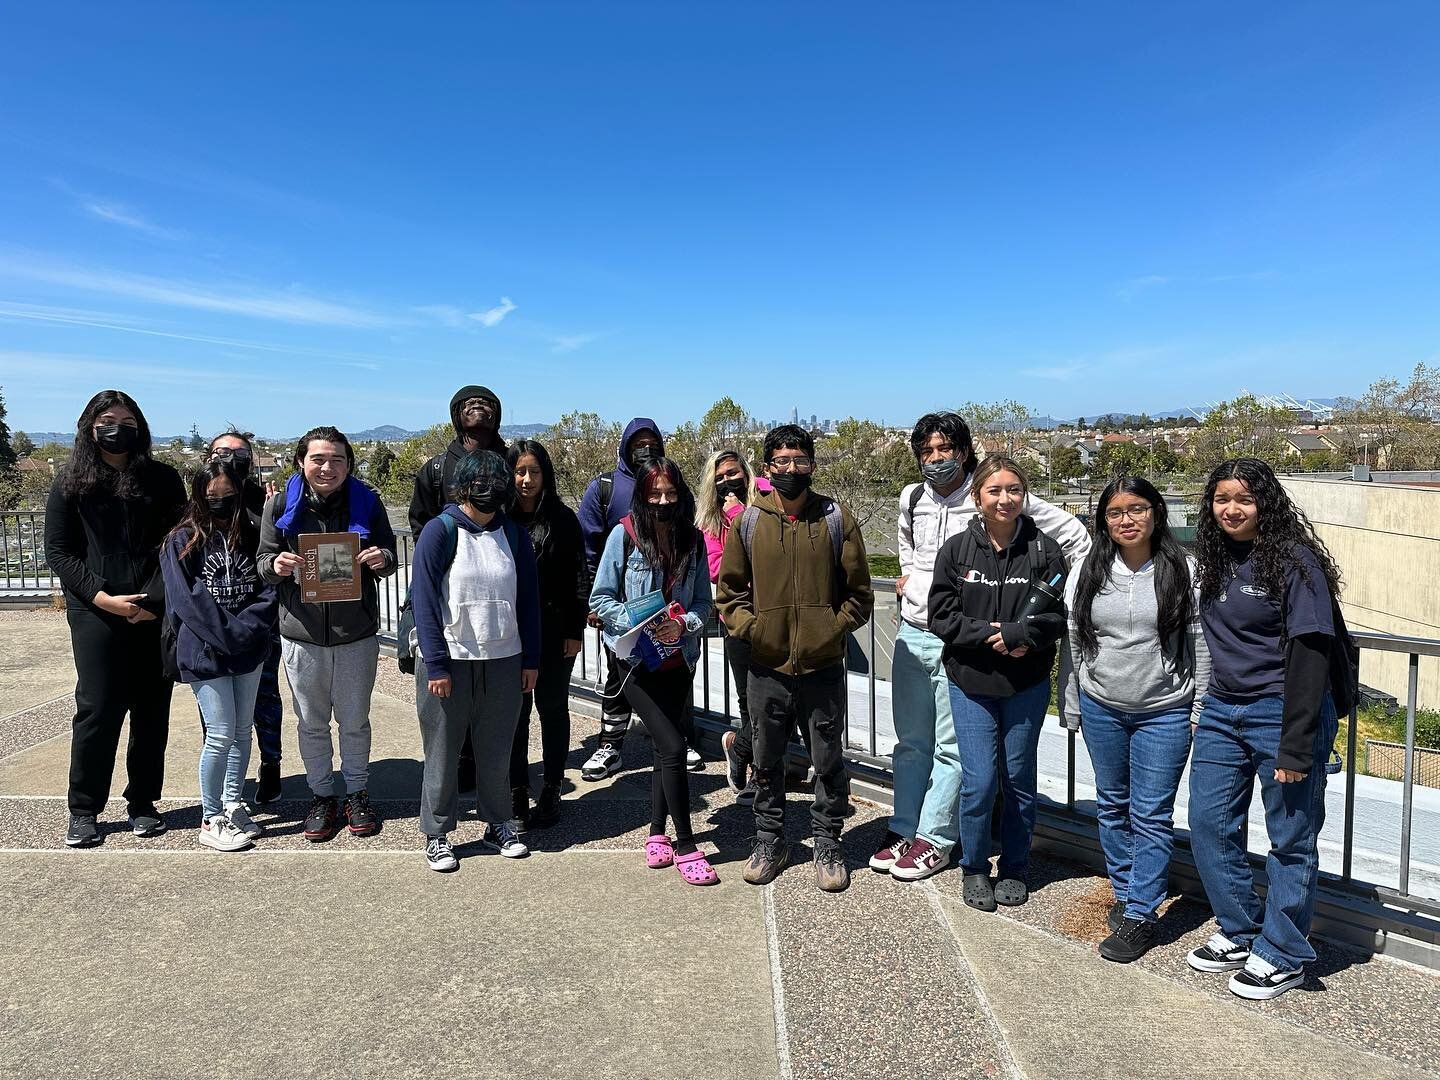 15 of our amazing seniors visited College of Alameda yesterday to see if it&rsquo;s the right place for them. With supports like Puente, ACCESO, UMOJA, and EOPS, it is a great option! Thank you for Mr. Horacio Corona Lira for organizing our trip.

#L